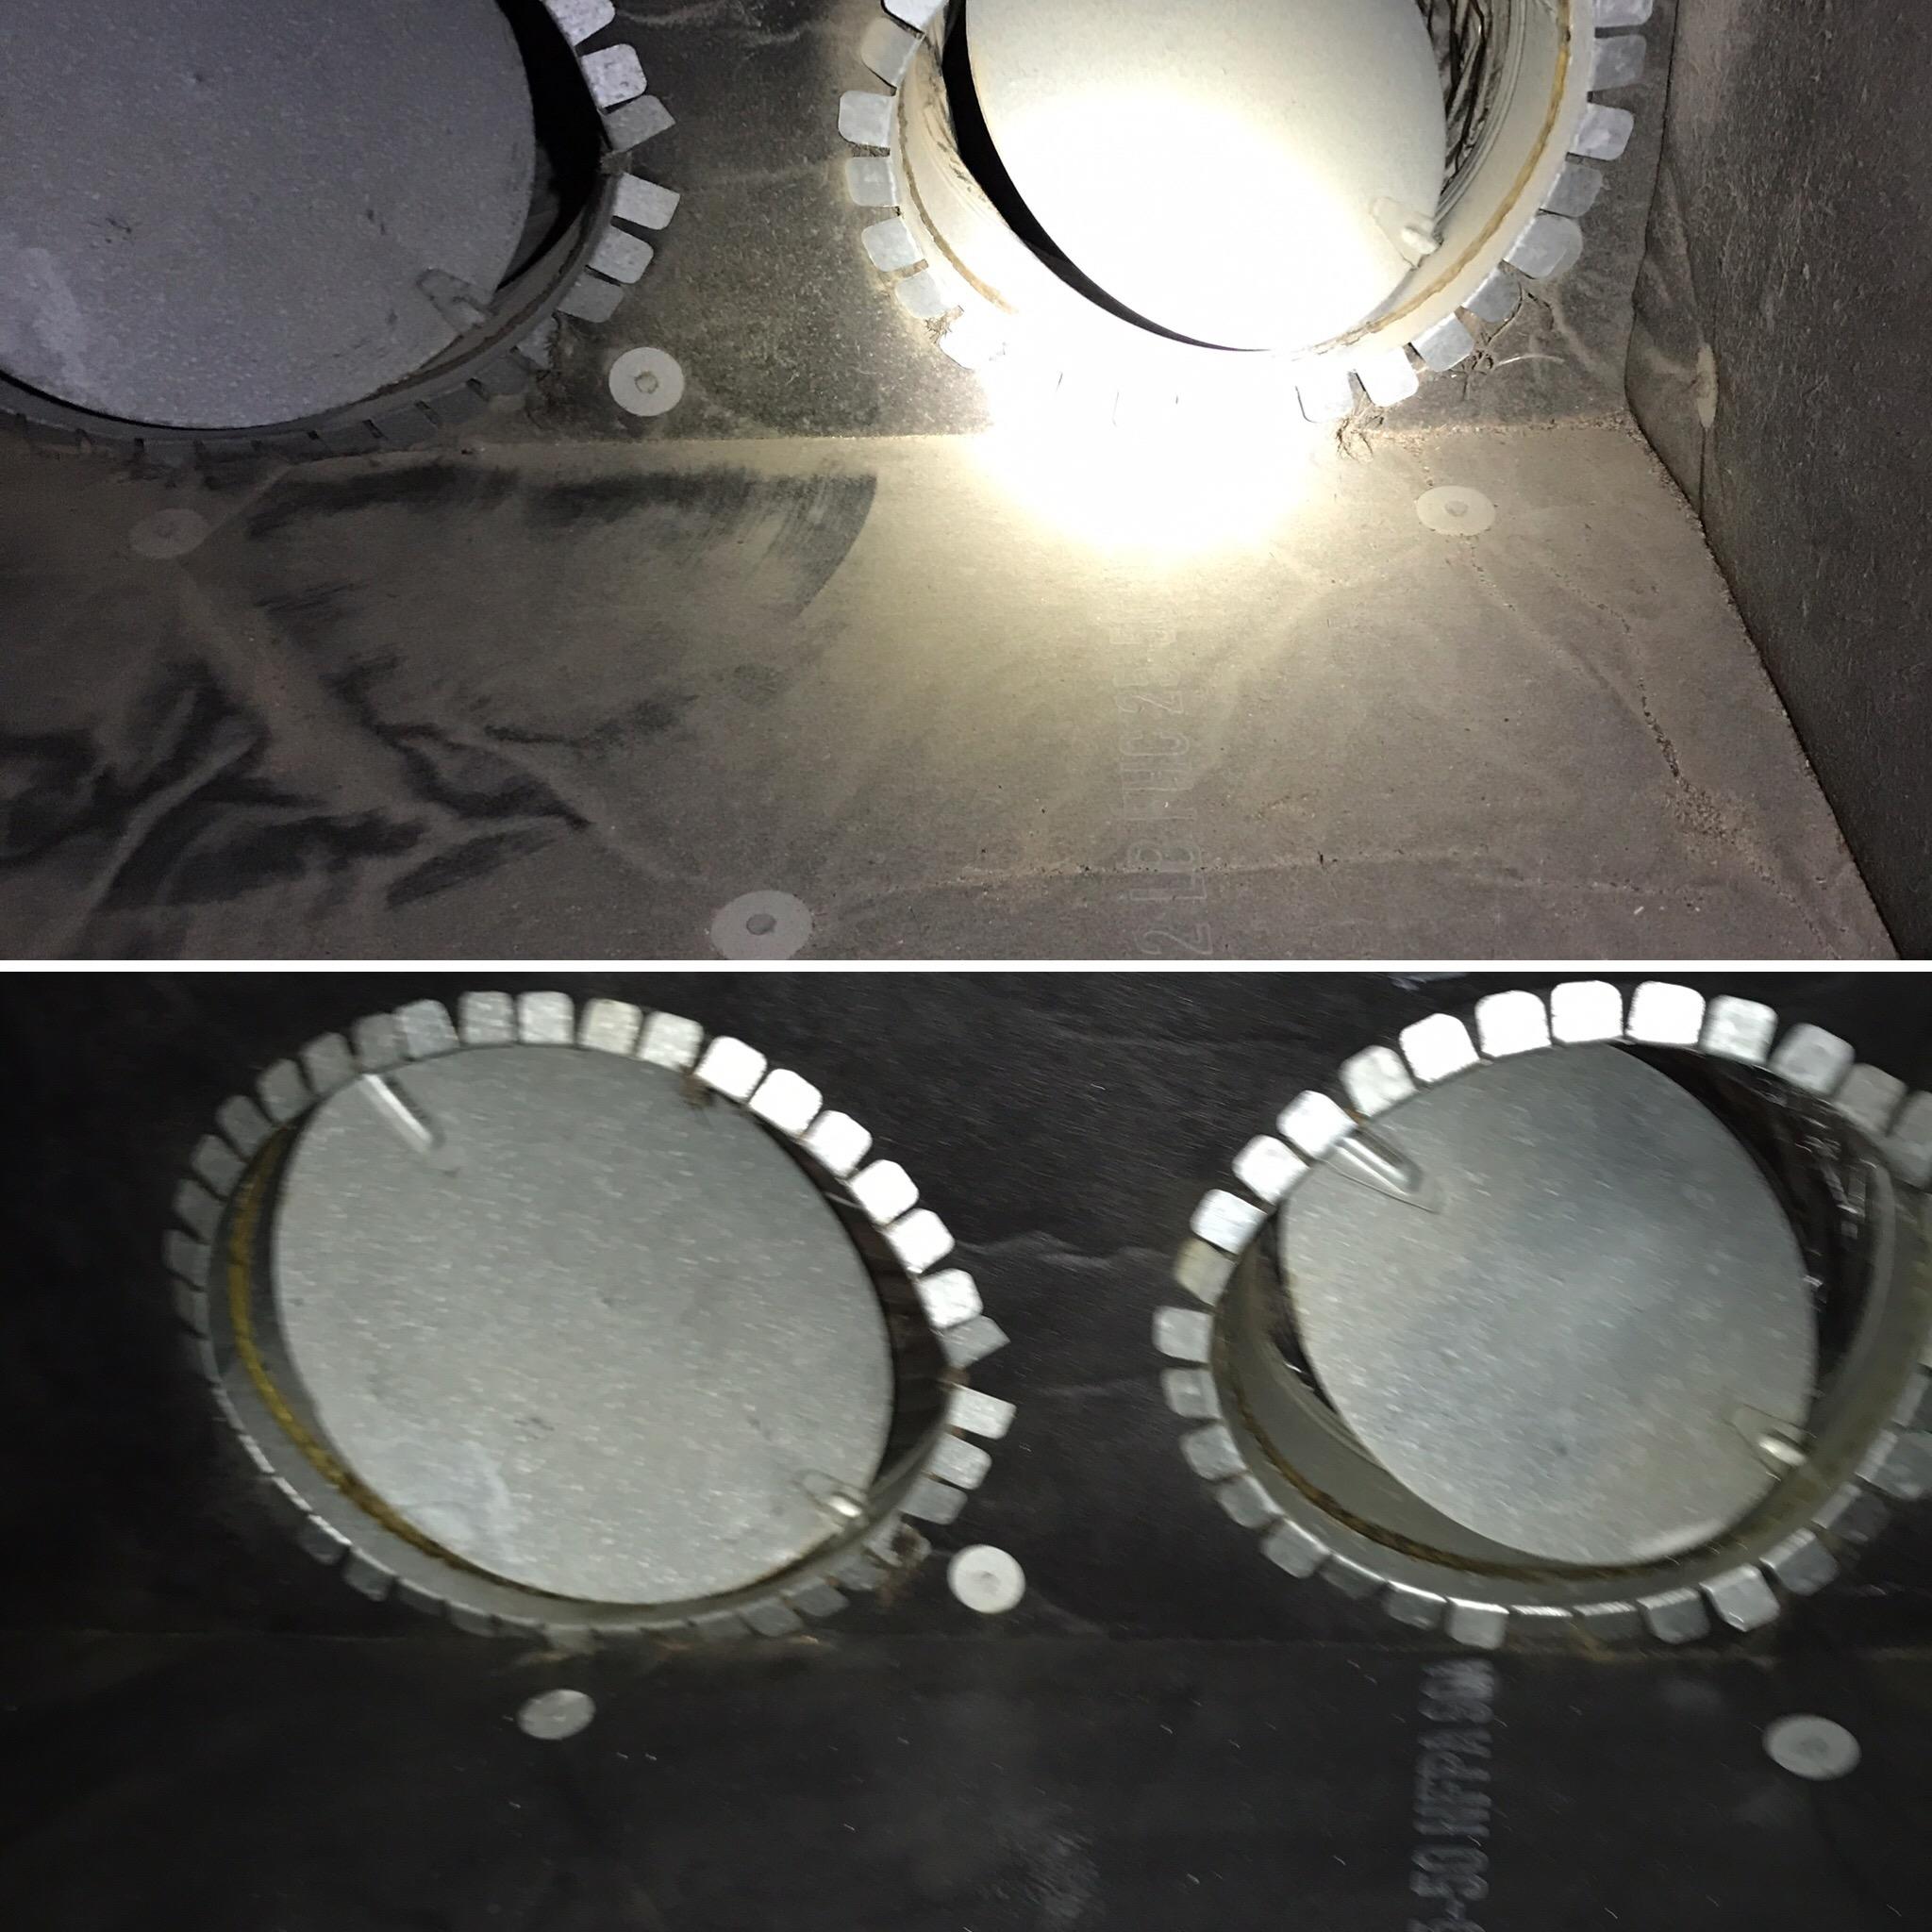 Supply Plenum - before & after cleaning